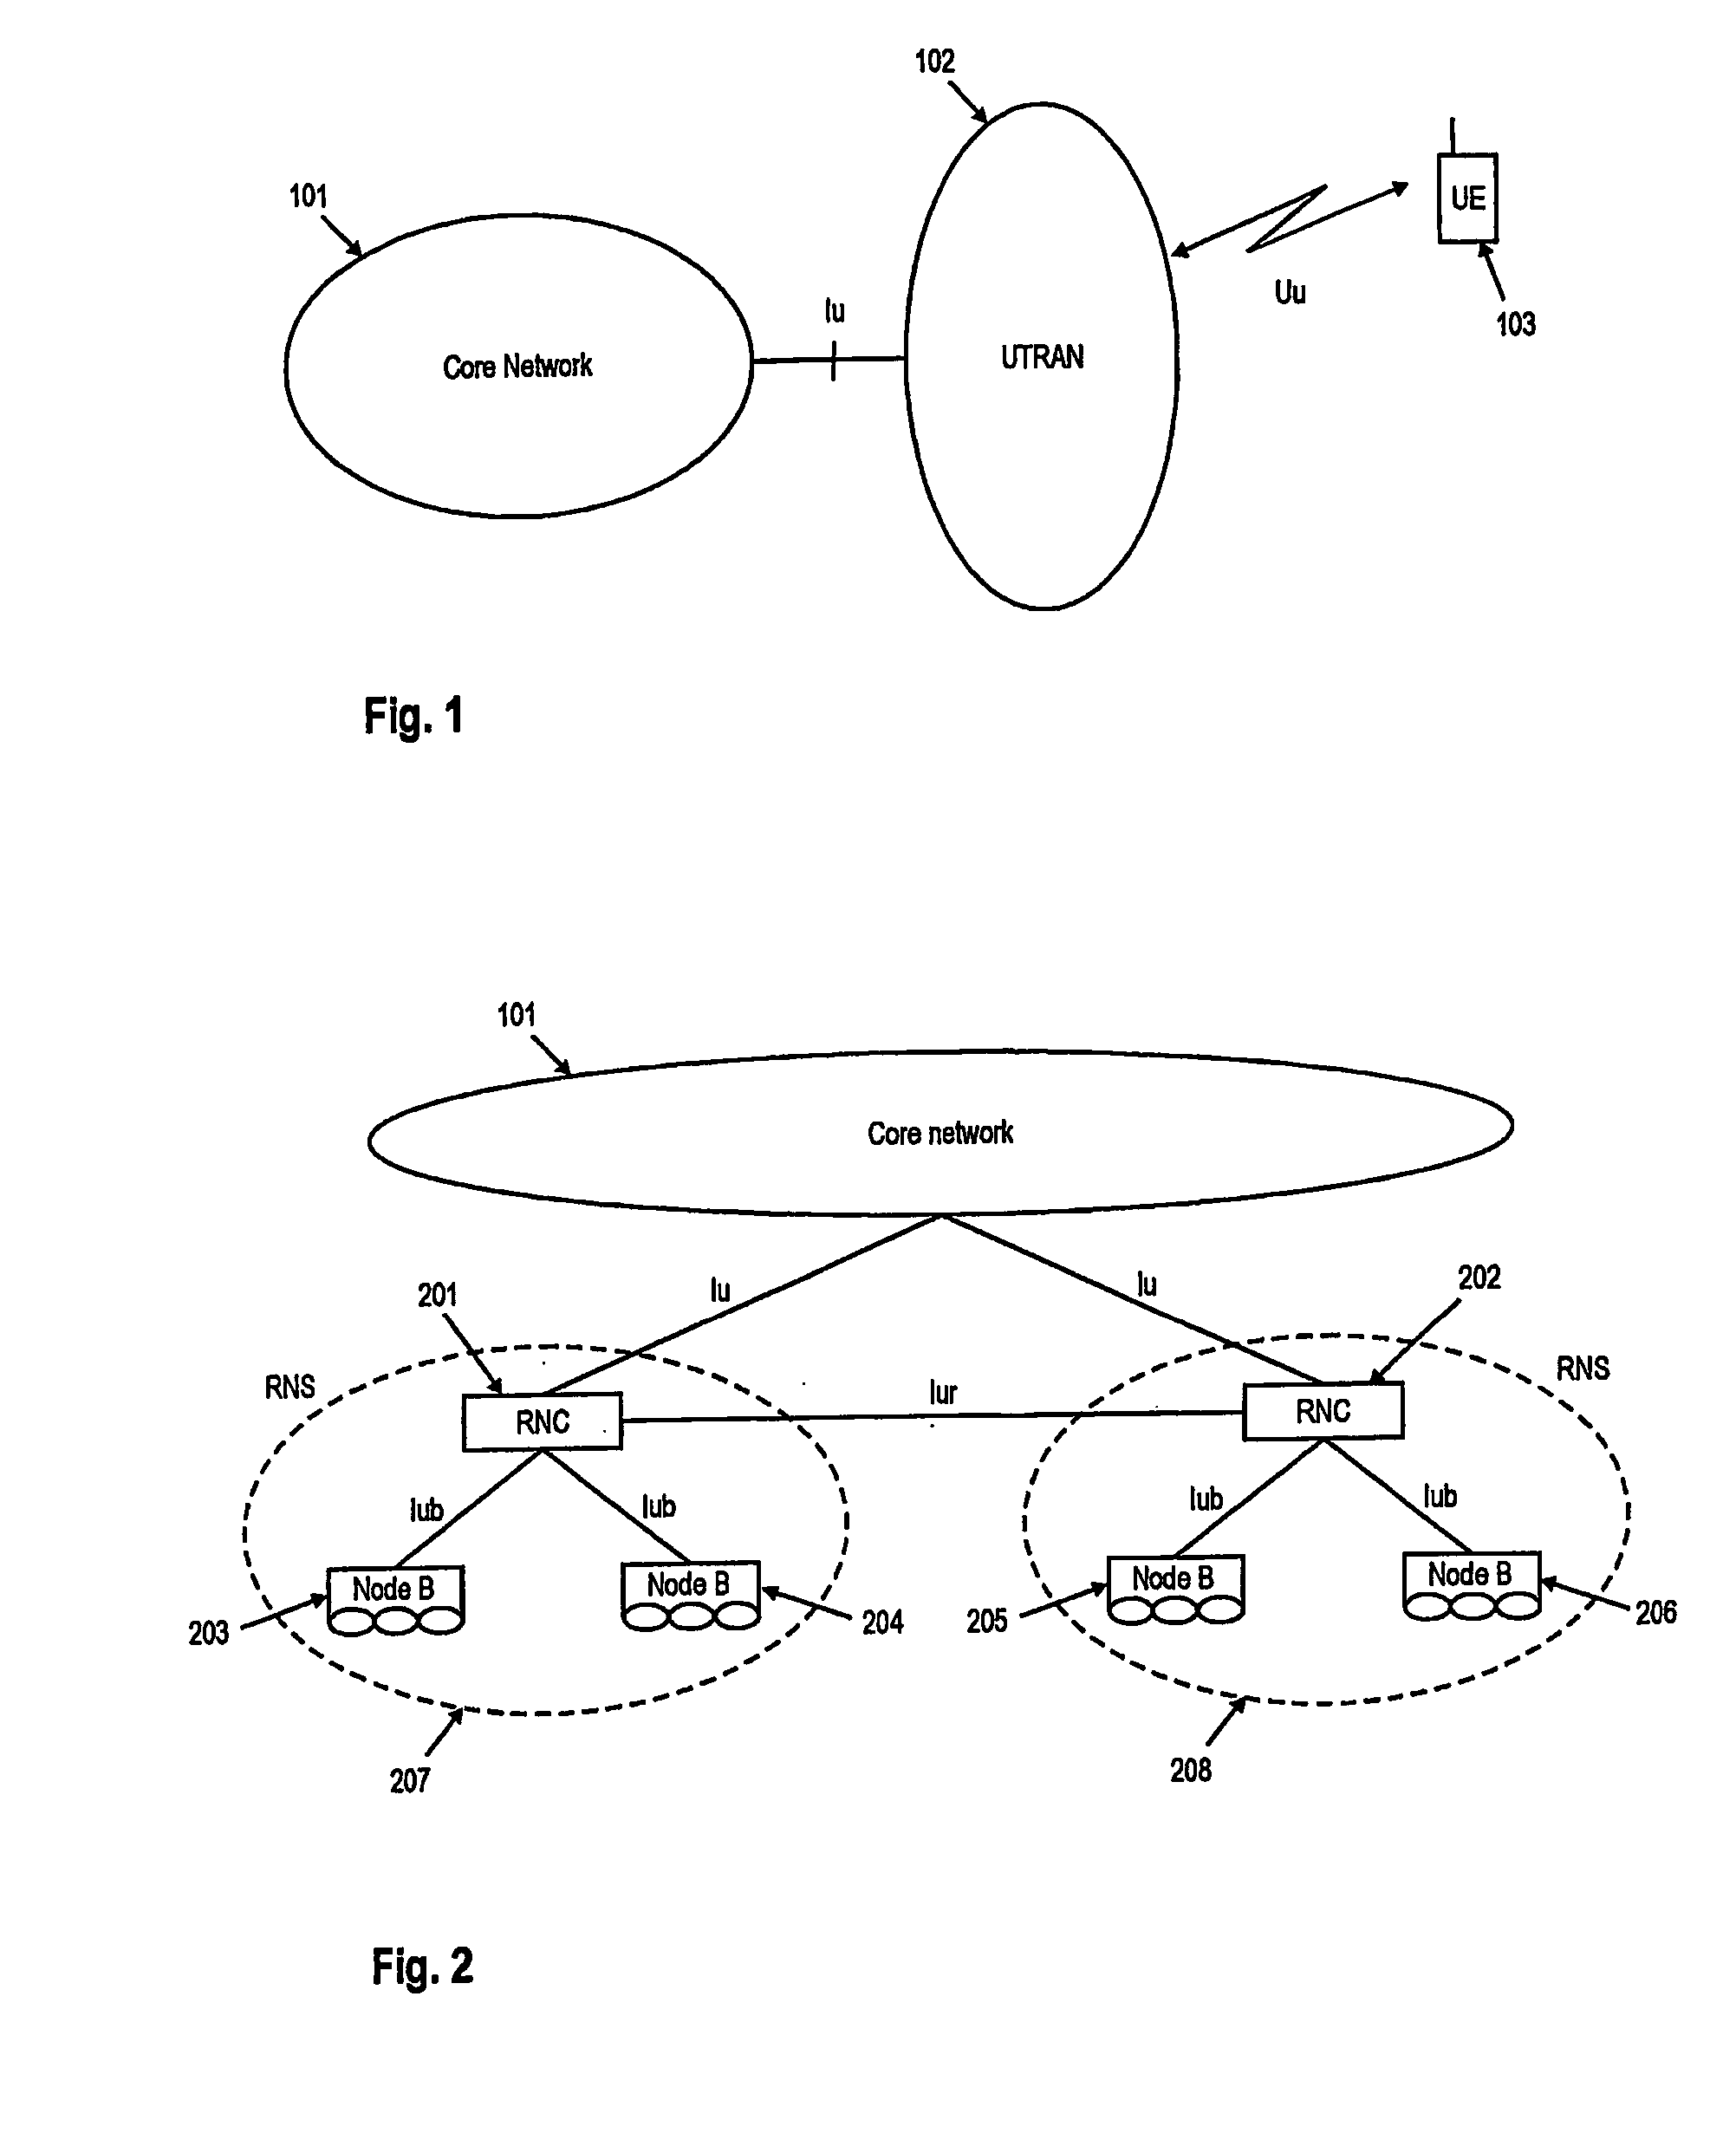 Quality-of-service (qos)-aware scheduling for uplink transmission on dedicated channels